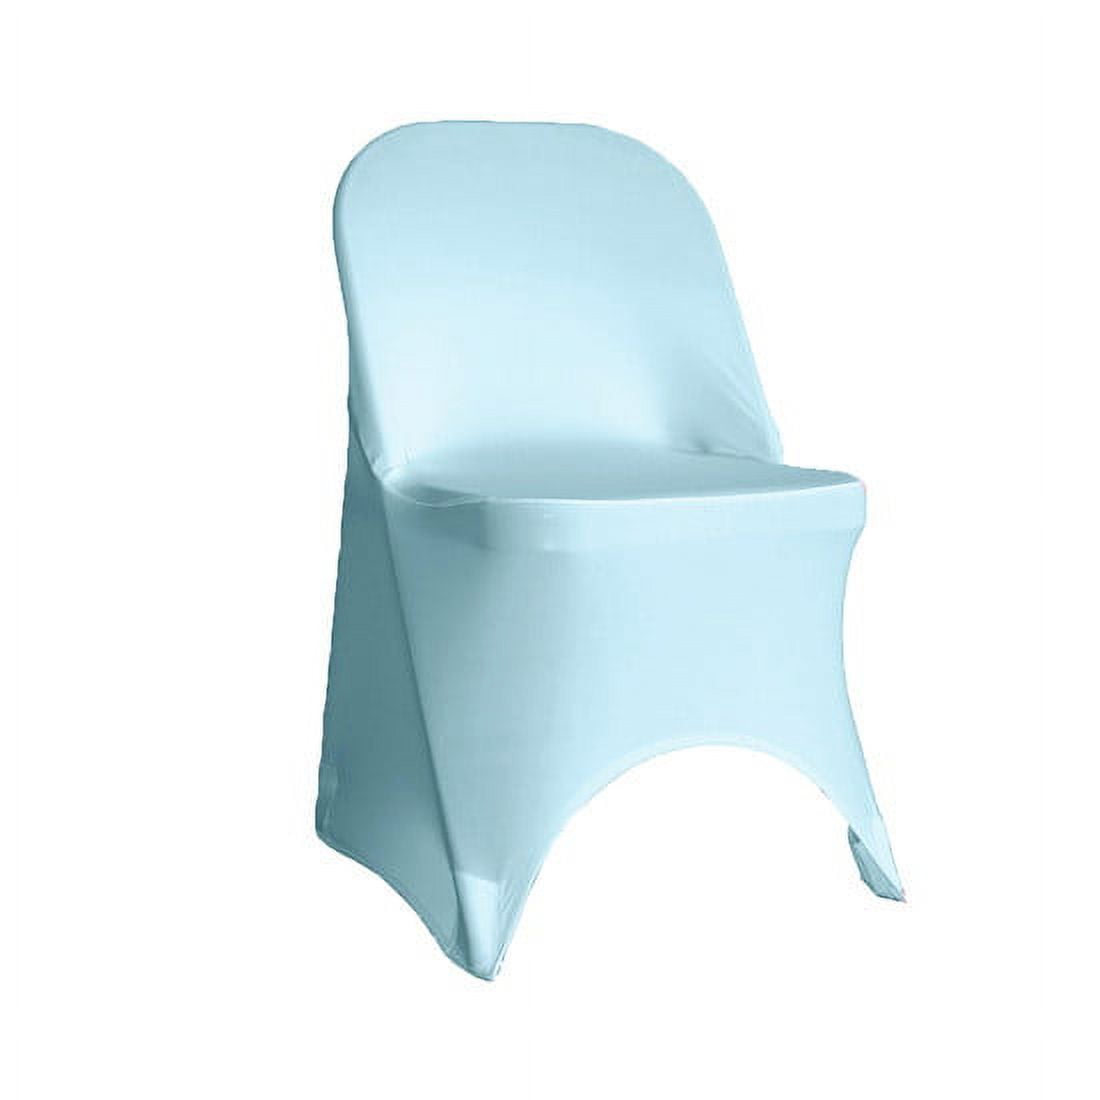 Your Chair Covers - Stretch Spandex Folding Chair Cover Yellow for Wedding,  Party, Birthday, Patio, etc. 